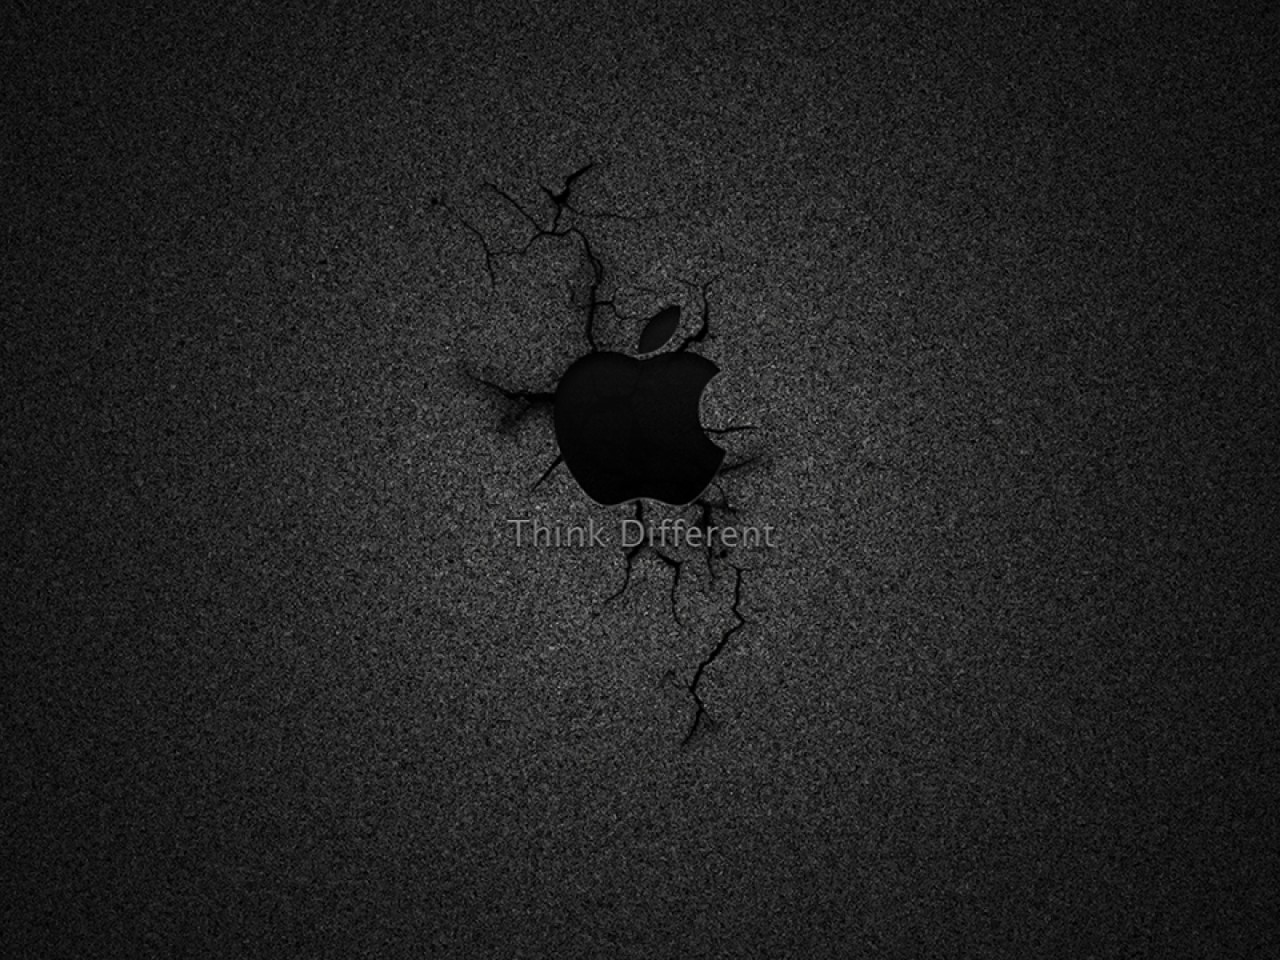 Think Different Apple Wallpaper High Definition High Resolution Hd Wallpapers High Definition High Resolution Hd Wallpapers